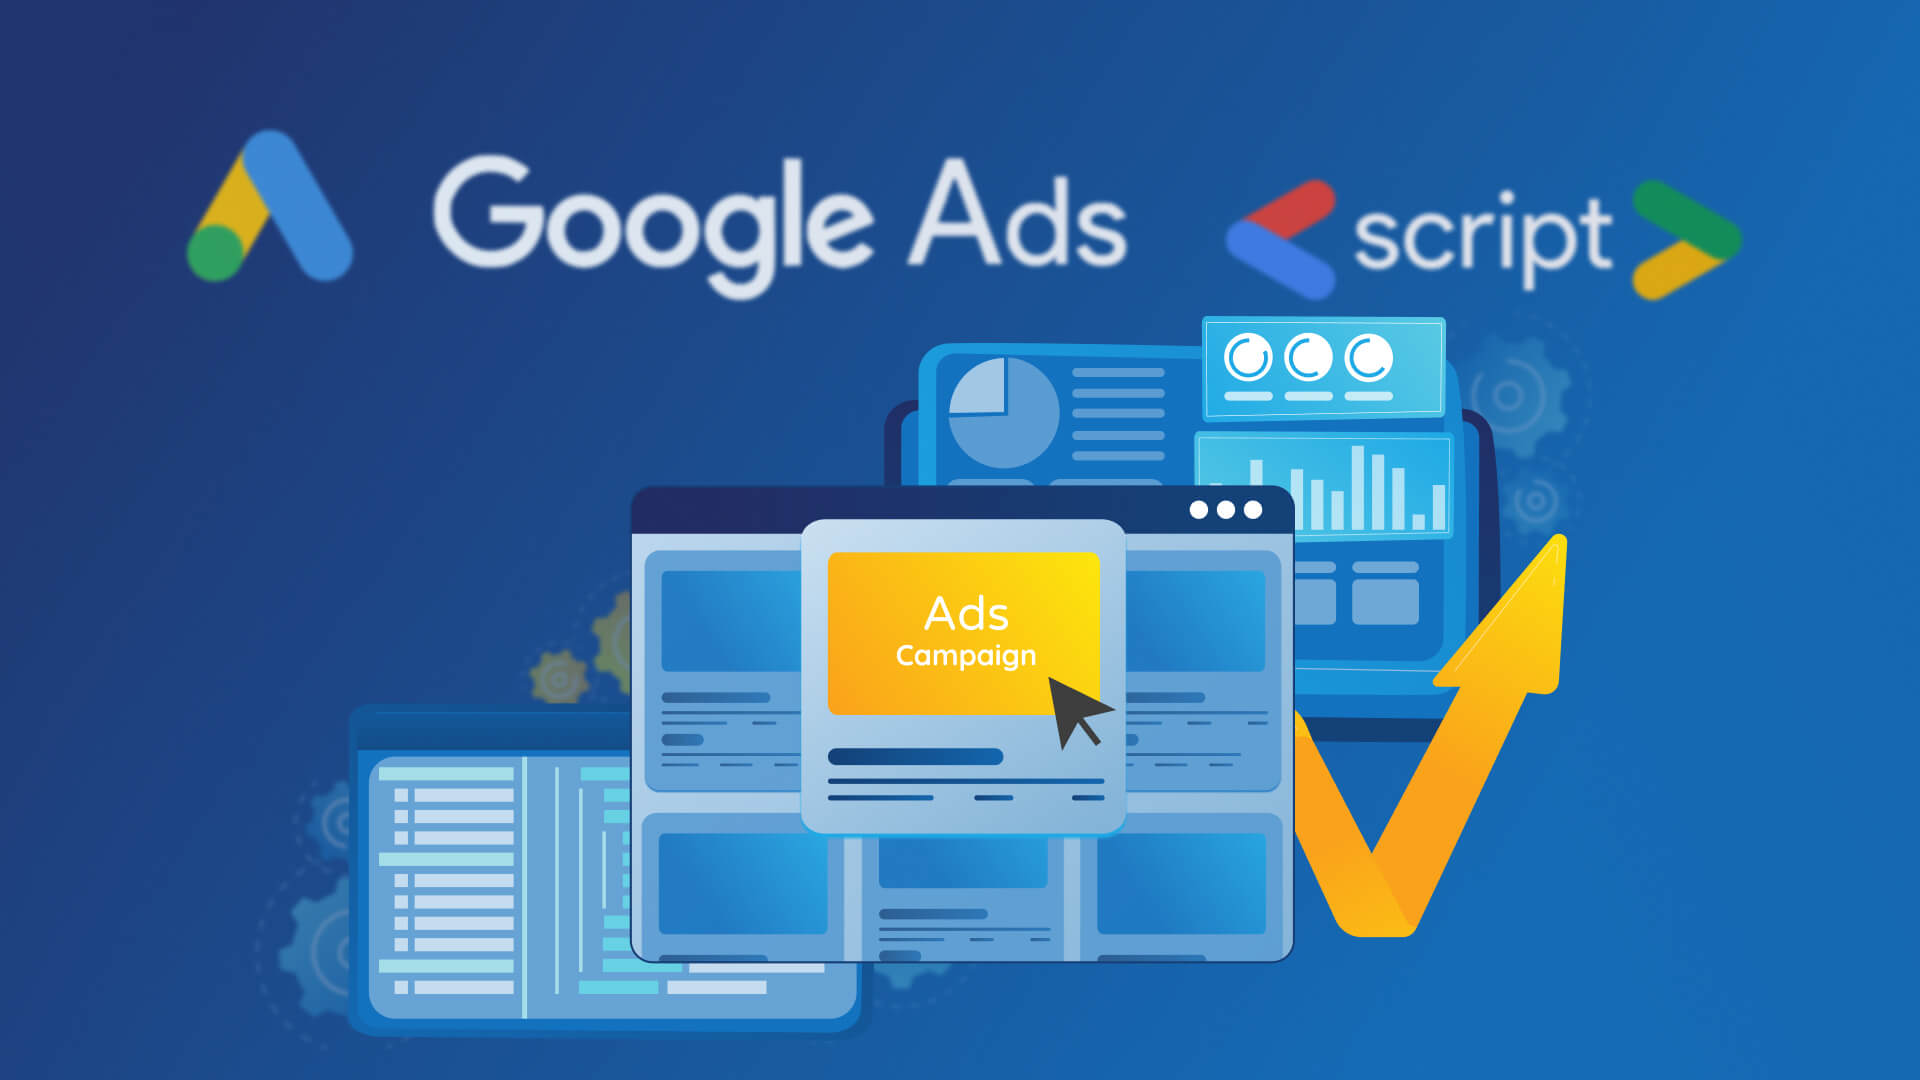 Maximize the performance of your PMax campaigns with Google Ads scripts